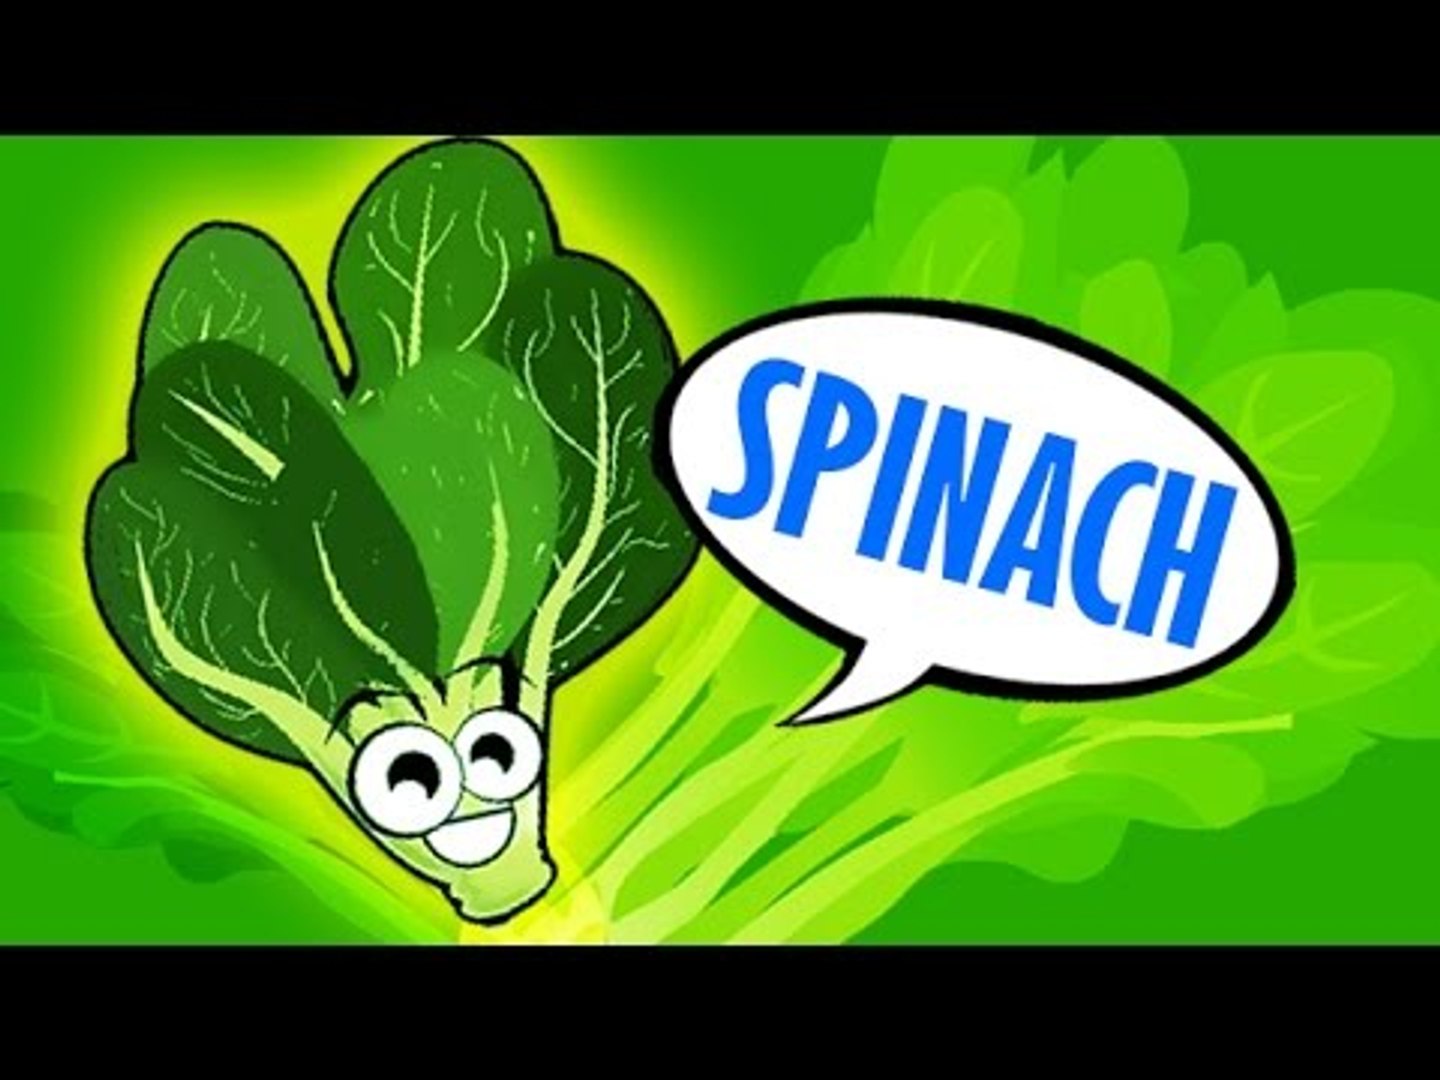 Spinach pronounce